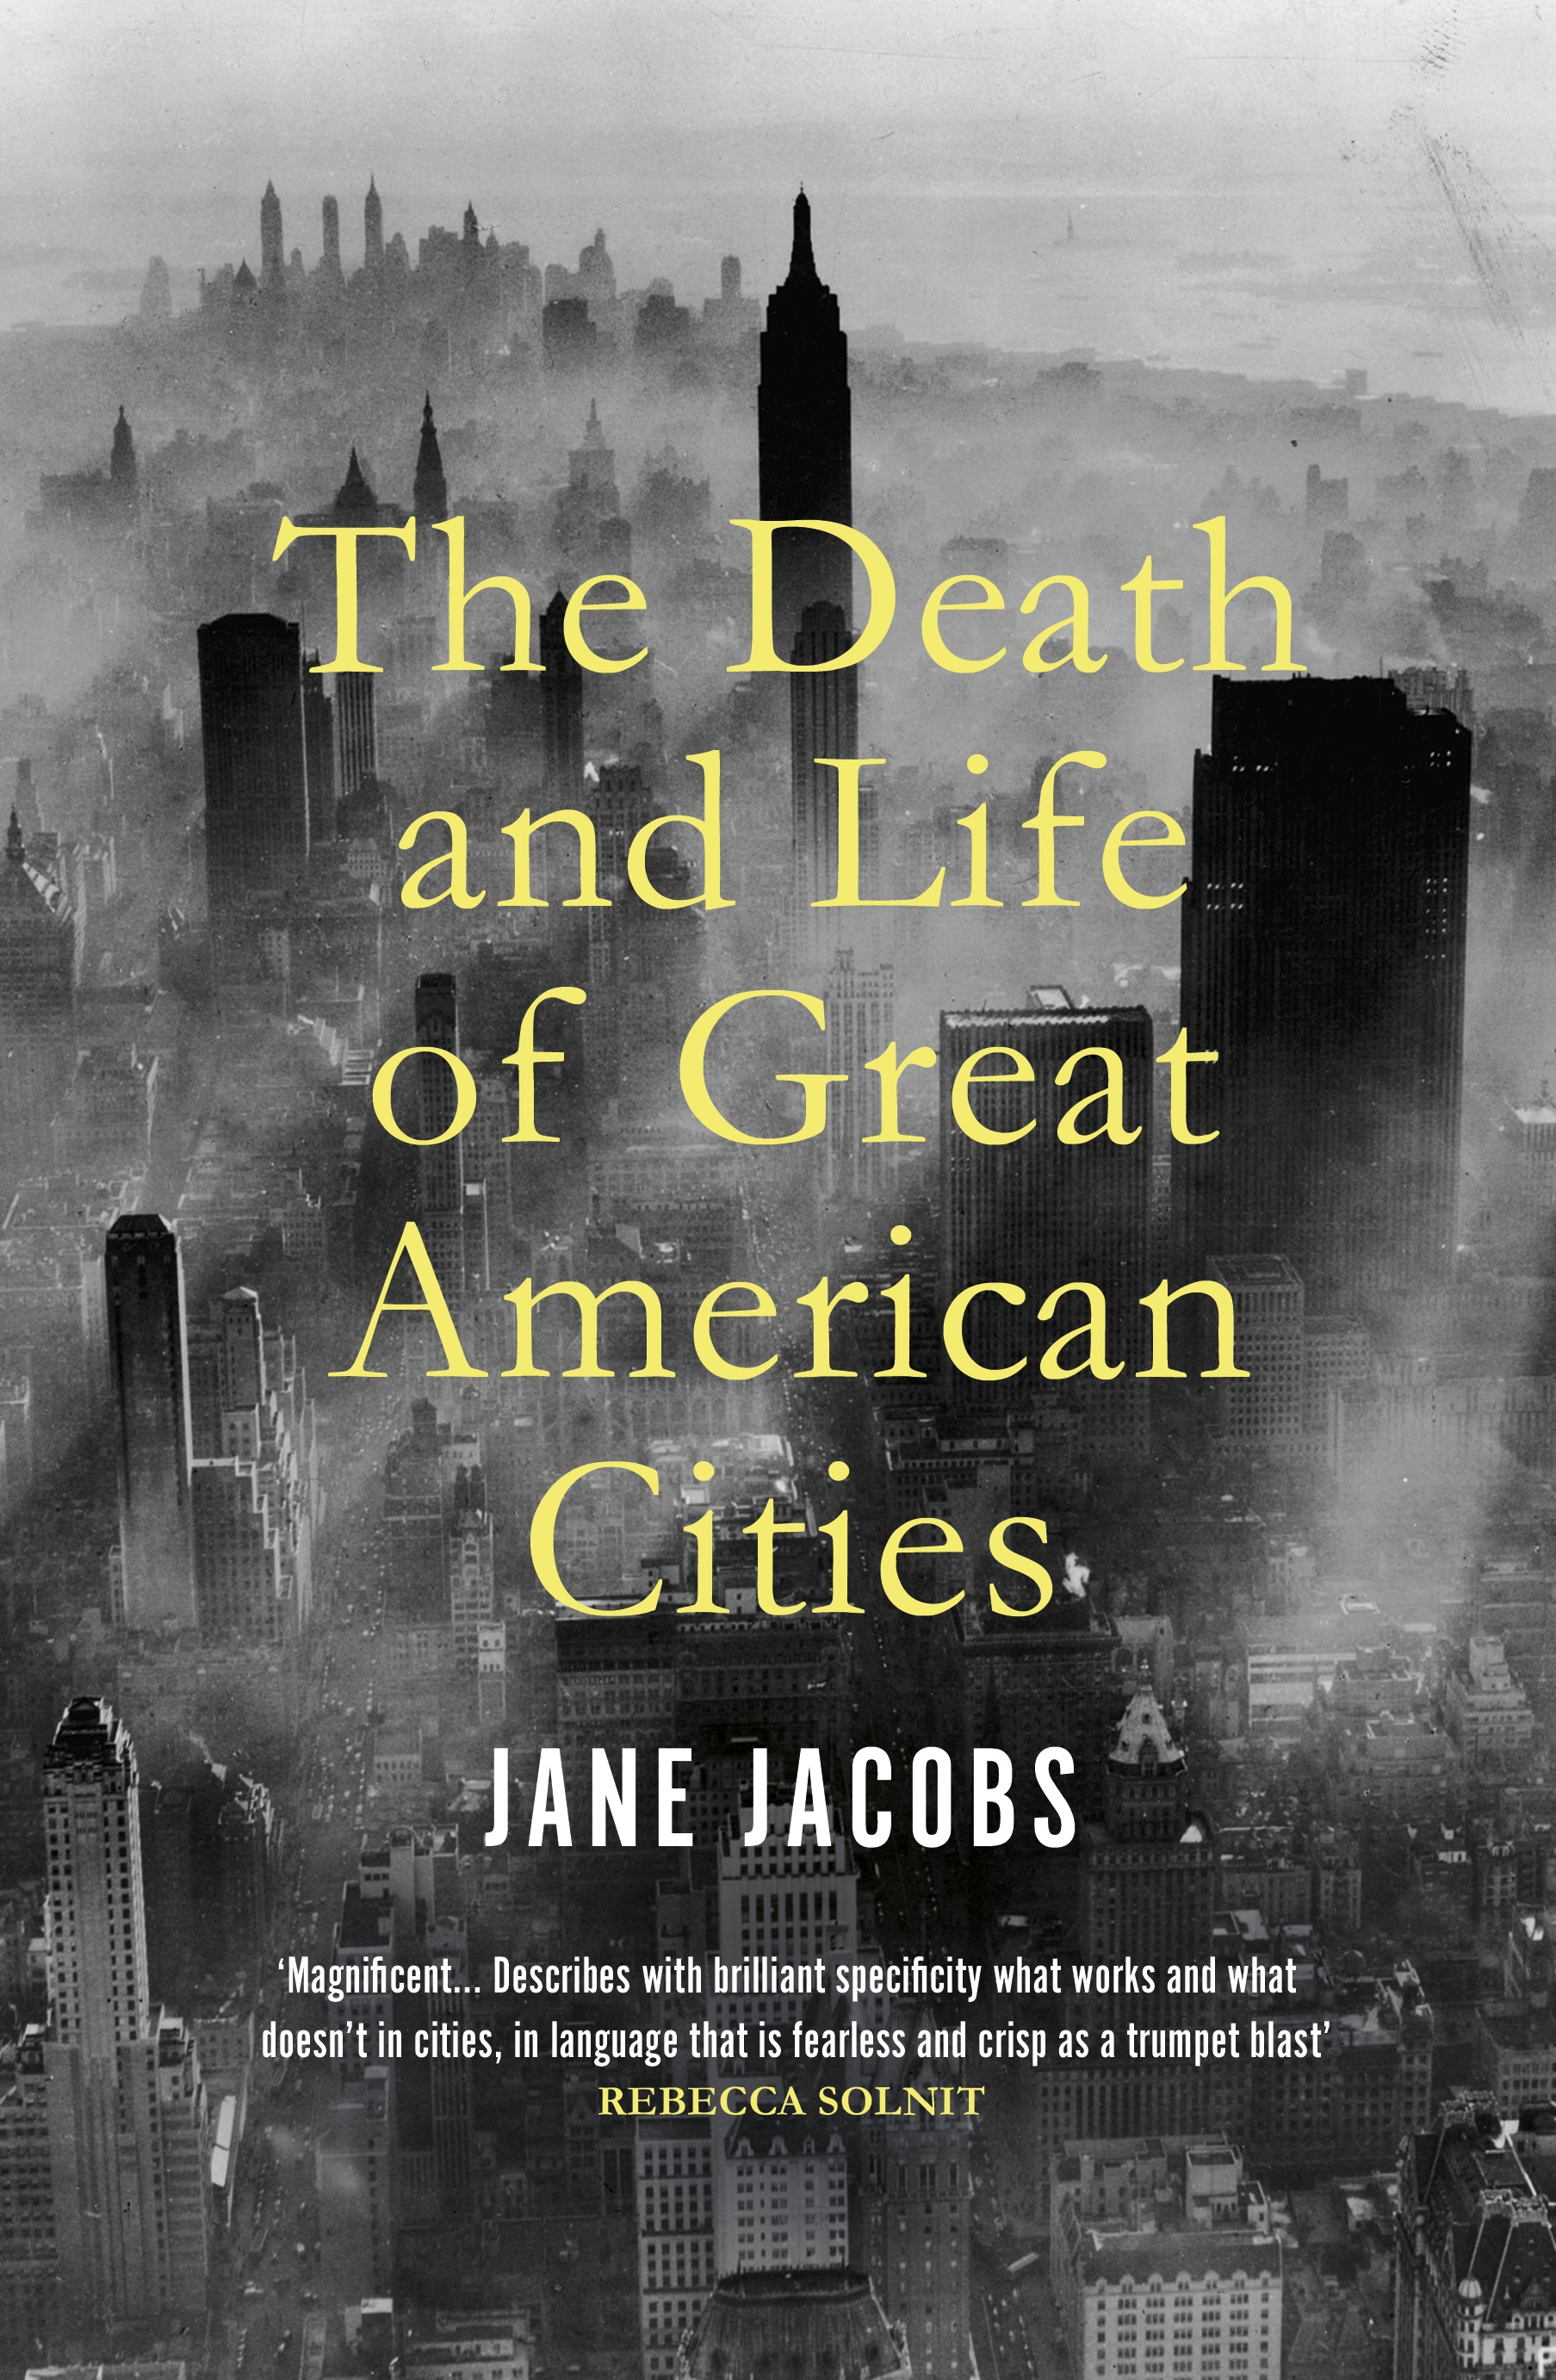 Book “The Death and Life of Great American Cities” by Jane Jacobs — March 19, 2020